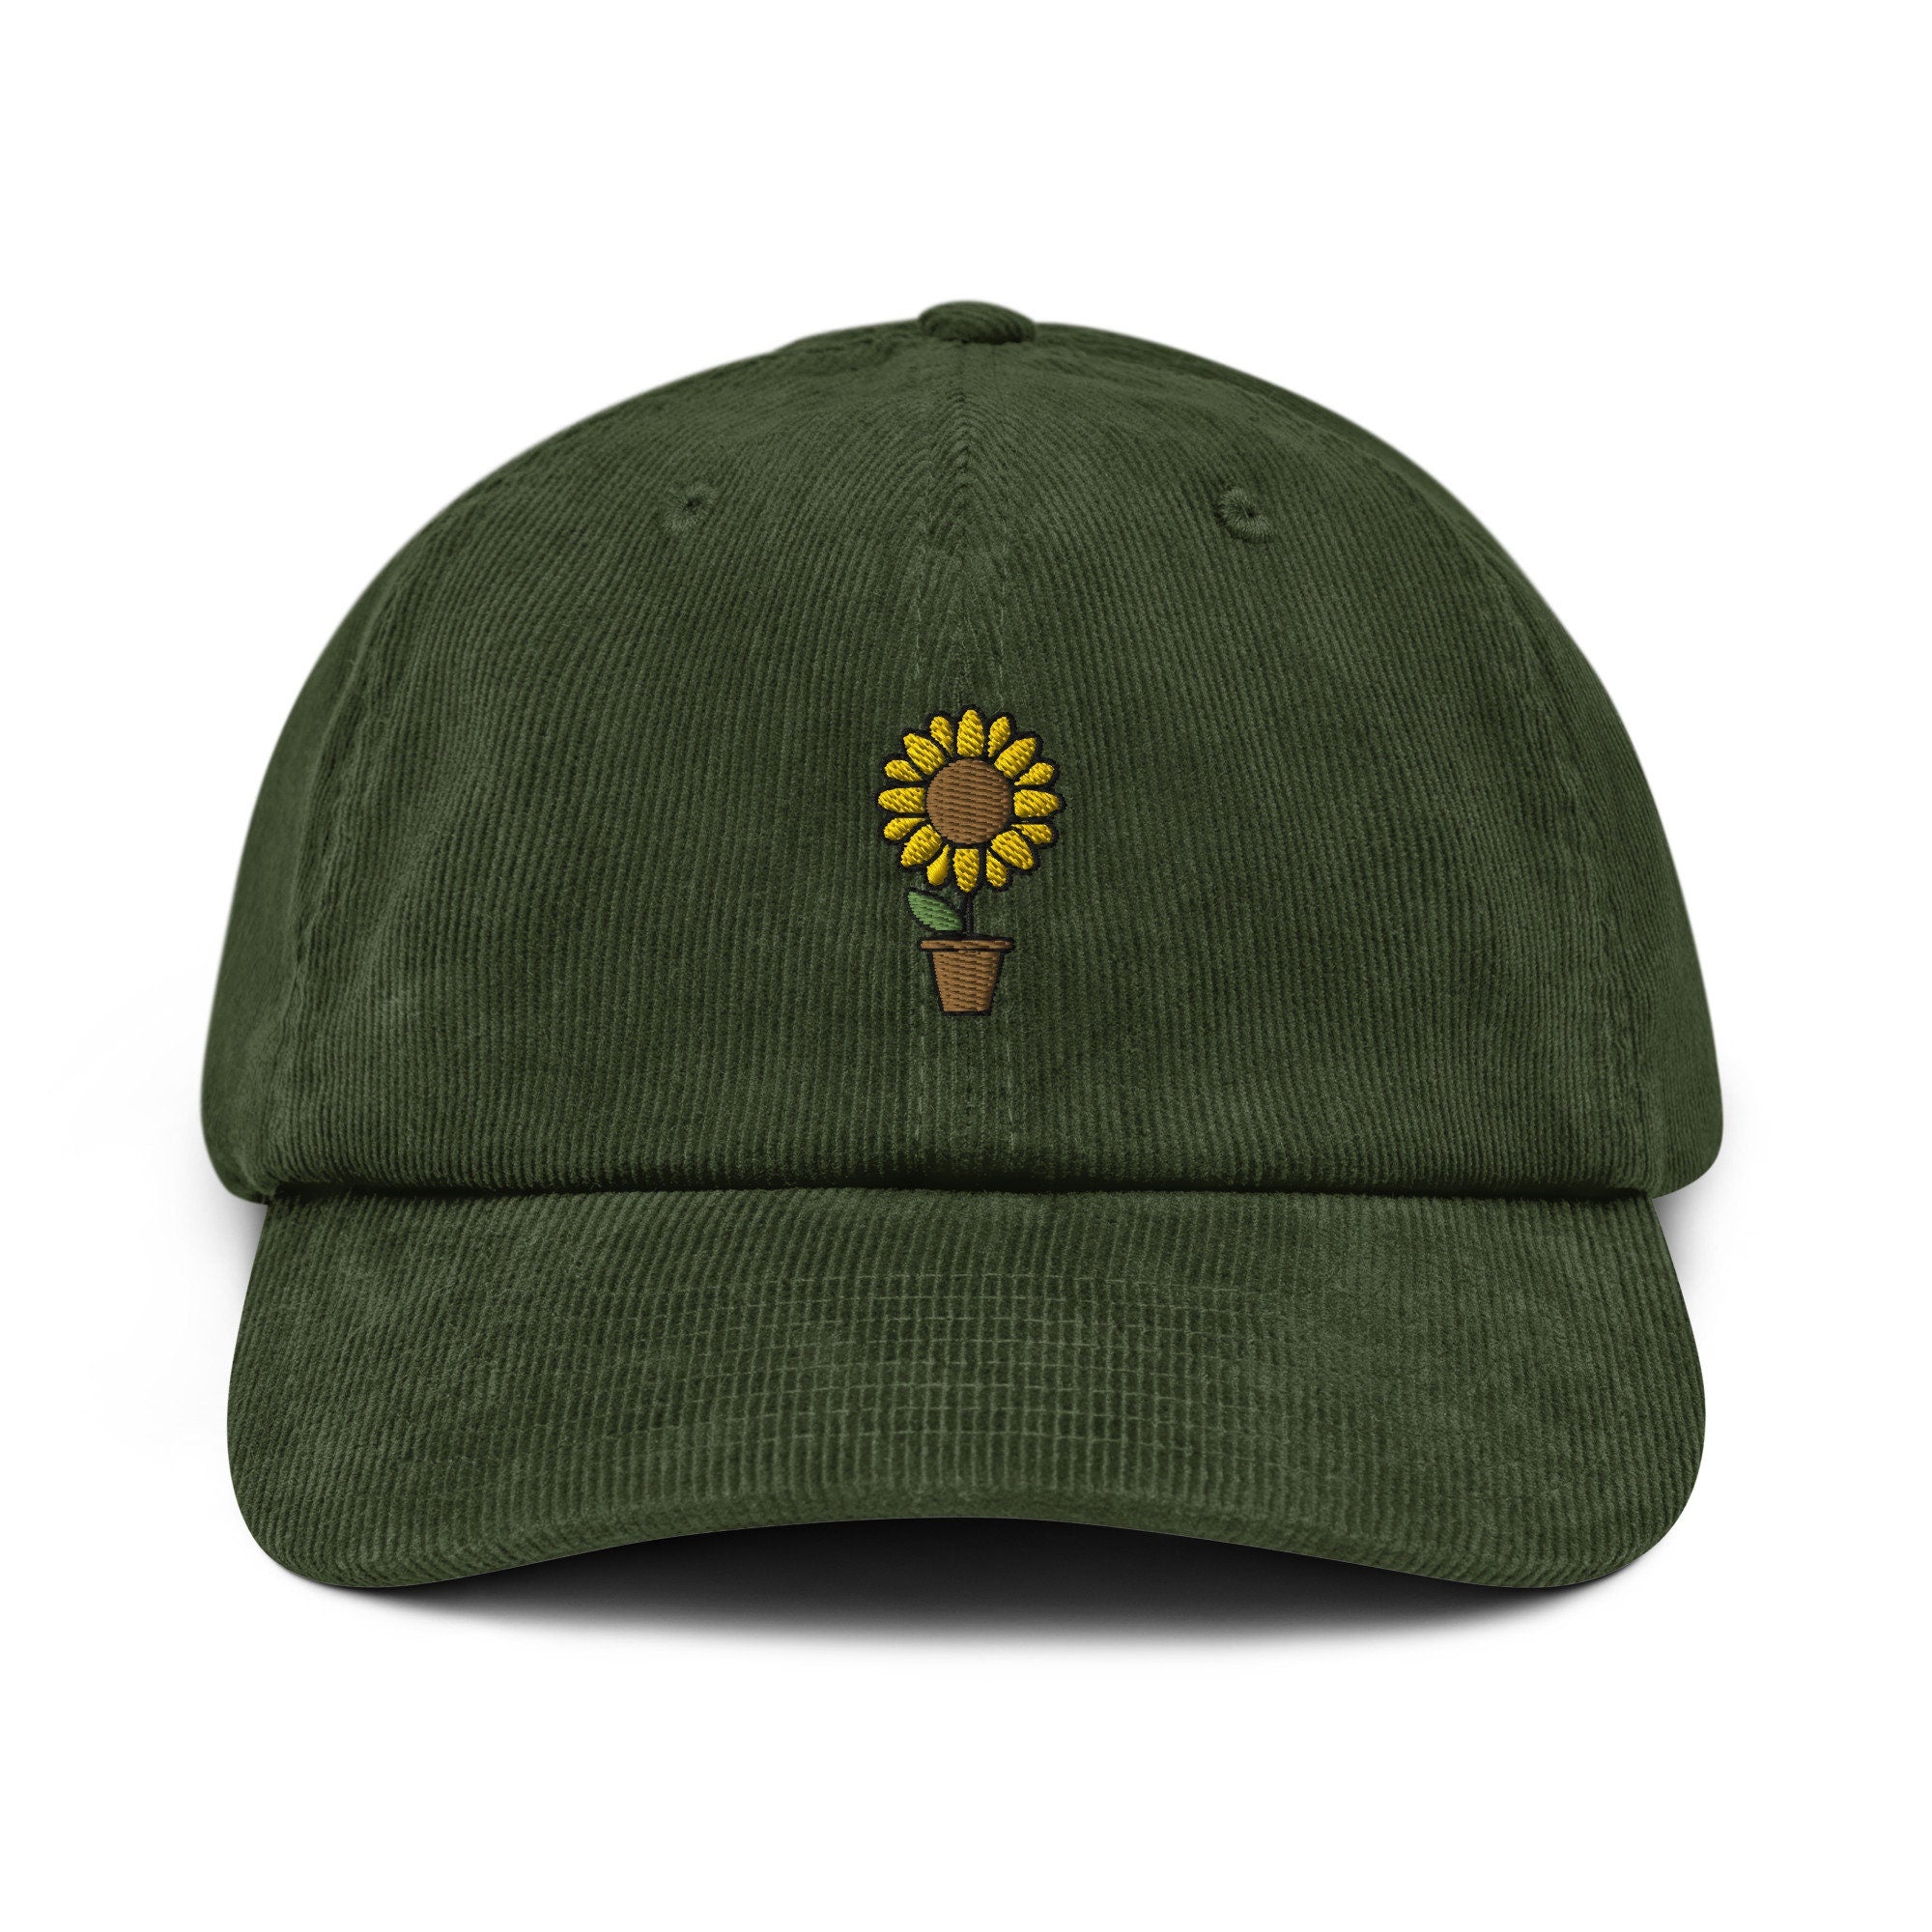 Sunflower Embroidered Corduroy Dad Hat, Handmade Corduroy Baseball Cap Gift - Multiple Colors